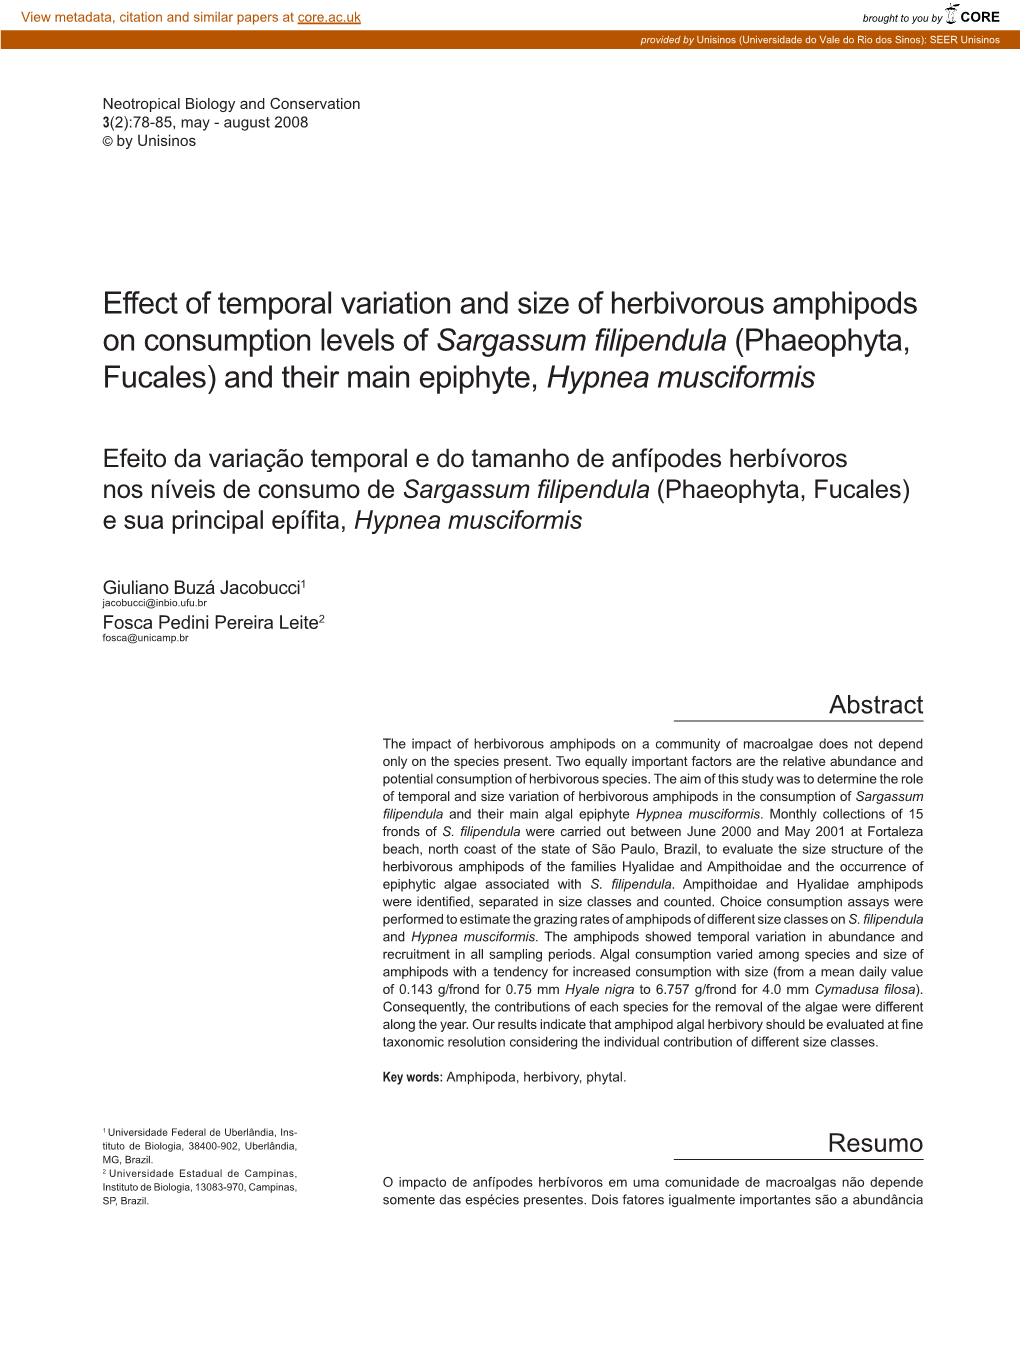 Effect of Temporal Variation and Size of Herbivorous Amphipods On